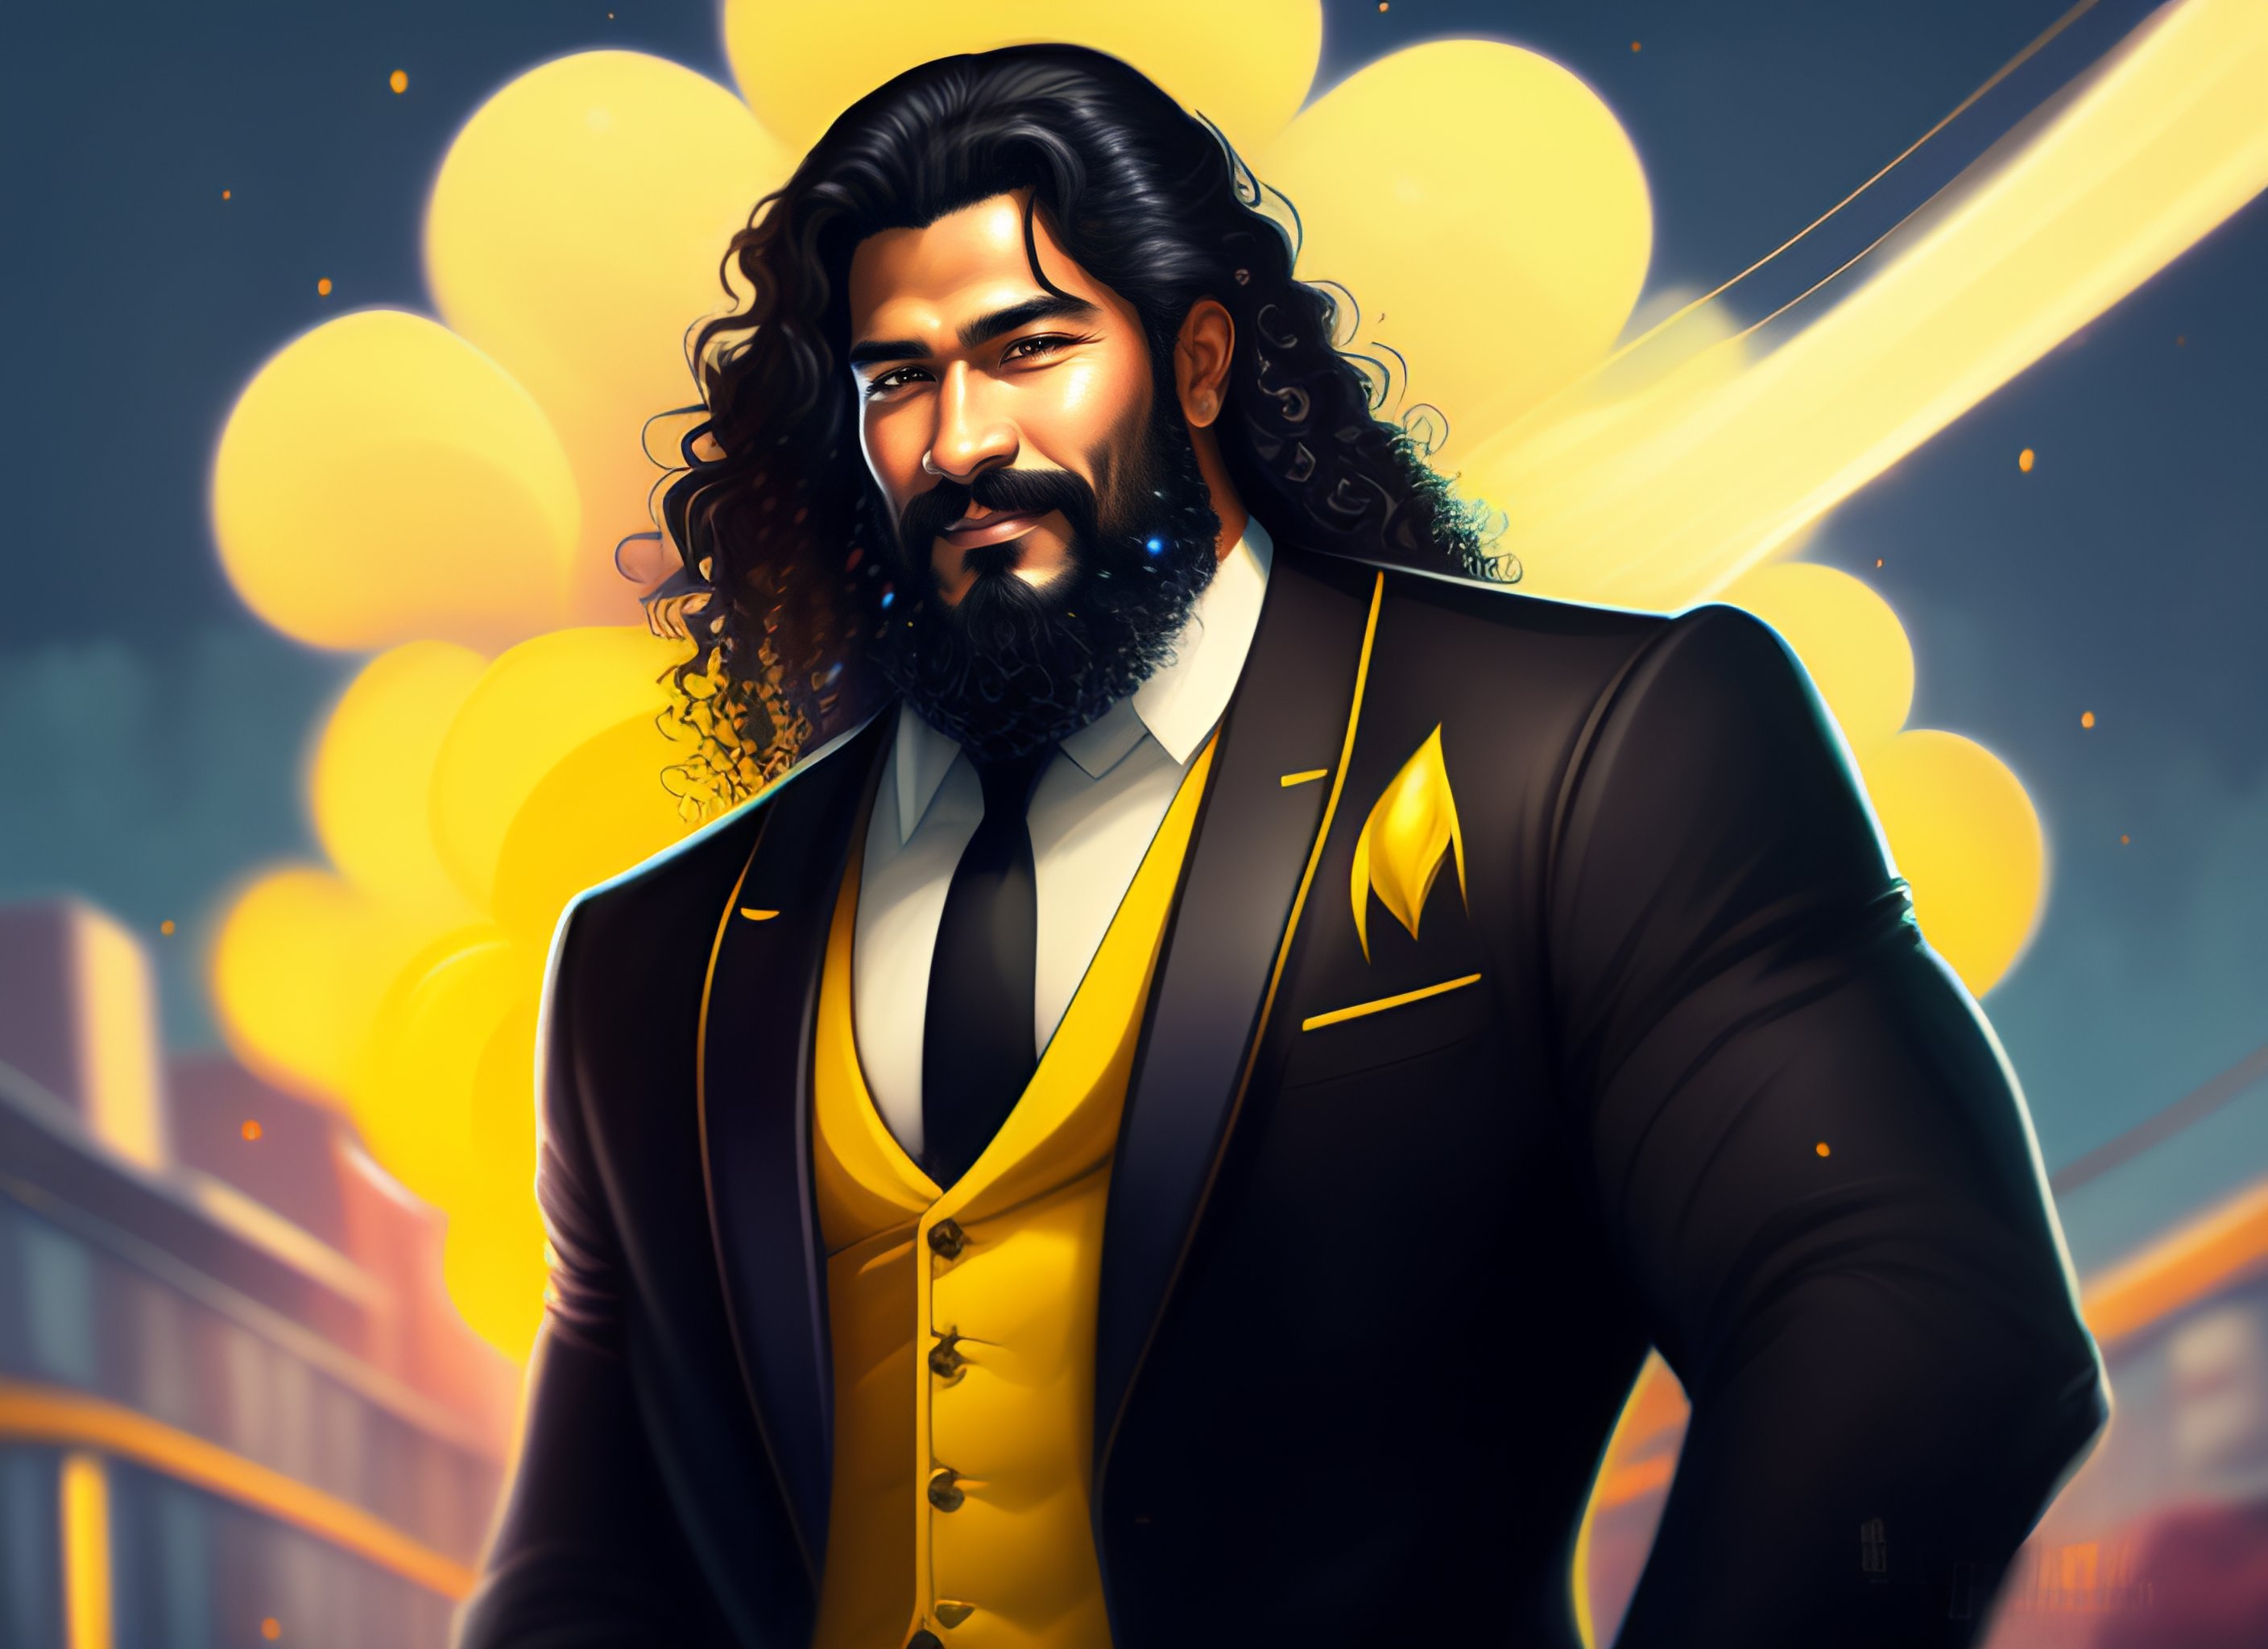 Lexica - Anime warrior king, 42 years old, black long hair, long curly  hair, having a short go tee ,yellow eyes, full beard perfectly trimmed,  wearin